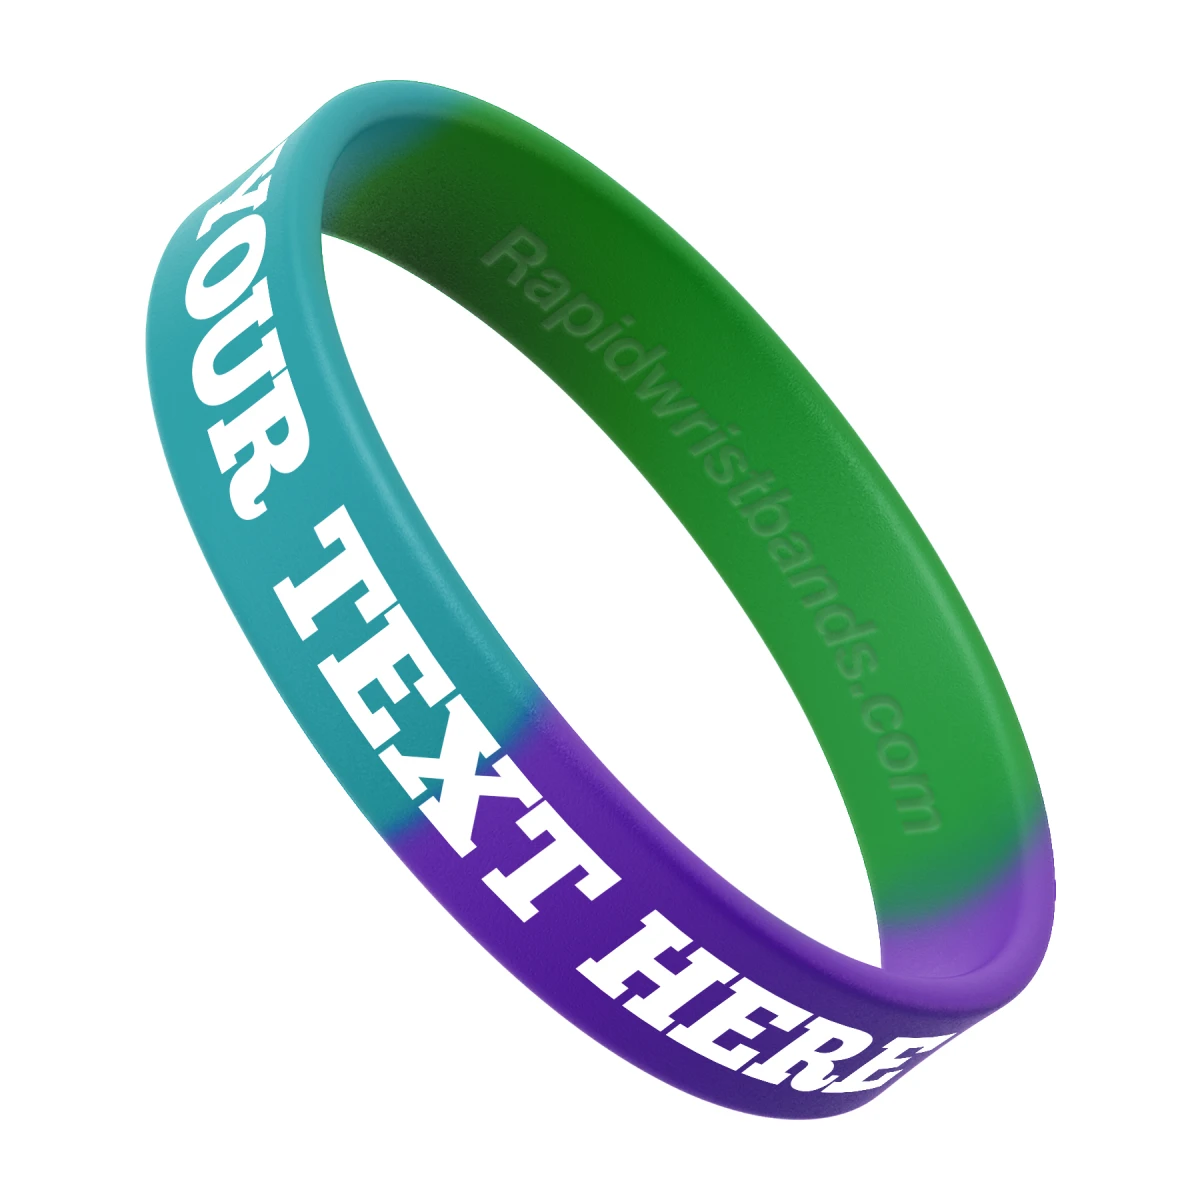 Segmented Teal/Green/Purple Wristband With Your Text Here Printed In White